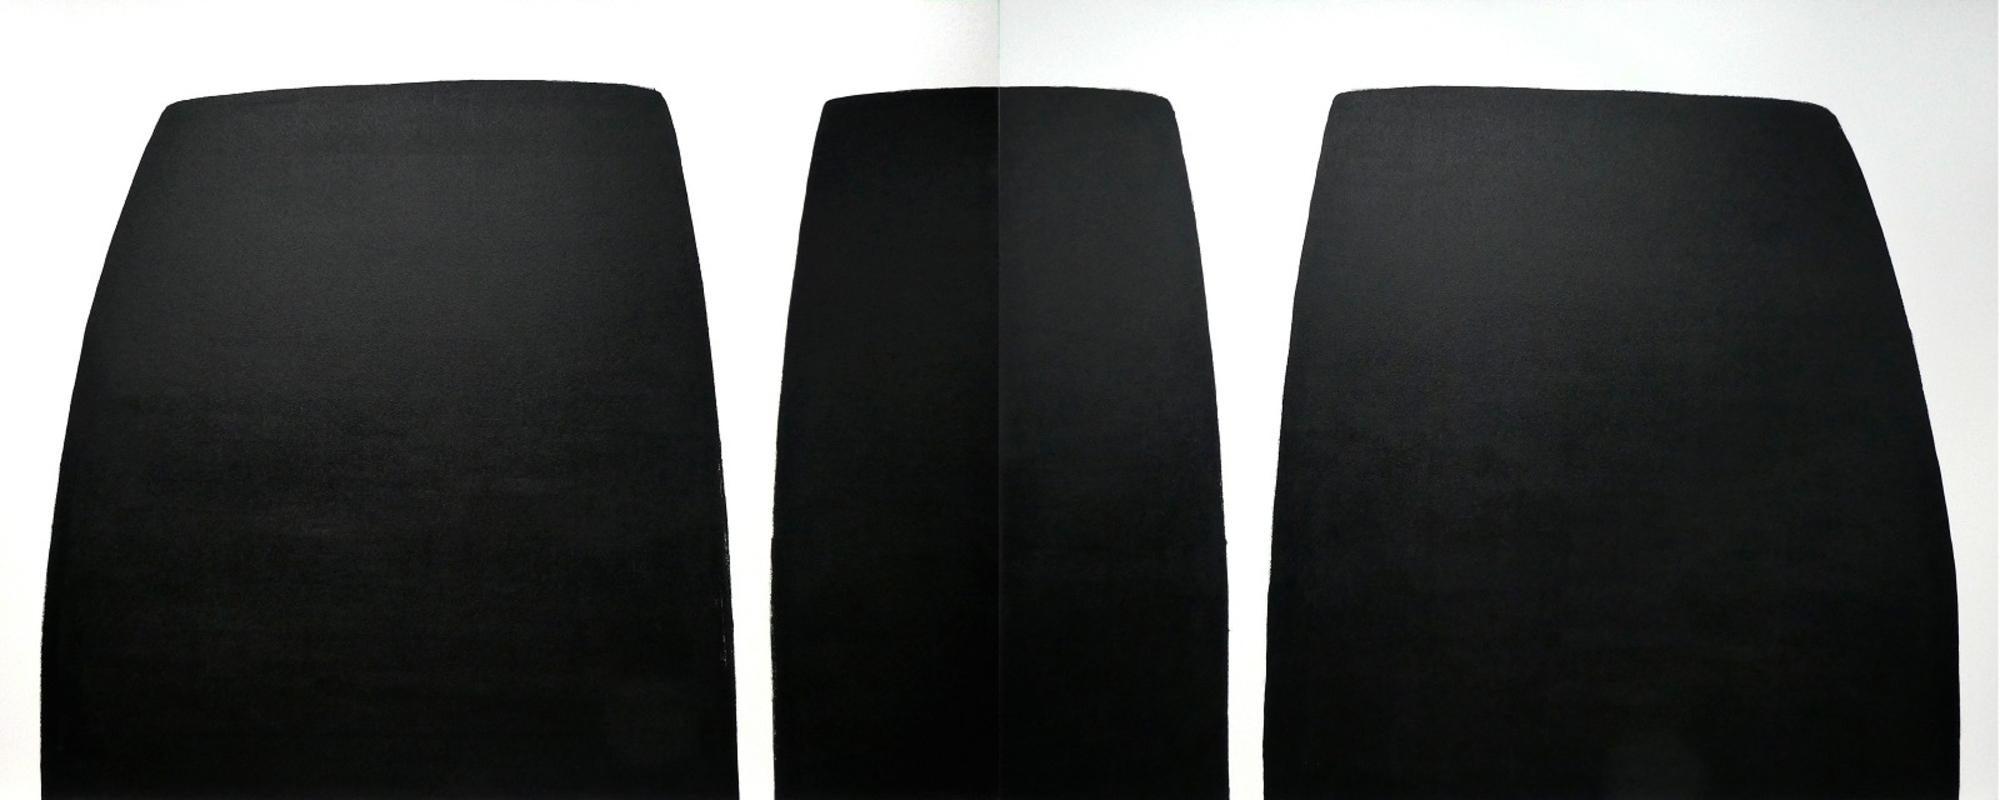 Marker 01 02 - black and white, abstract minimalist, diptych, acrylic on canvas - Painting by Tim Forbes